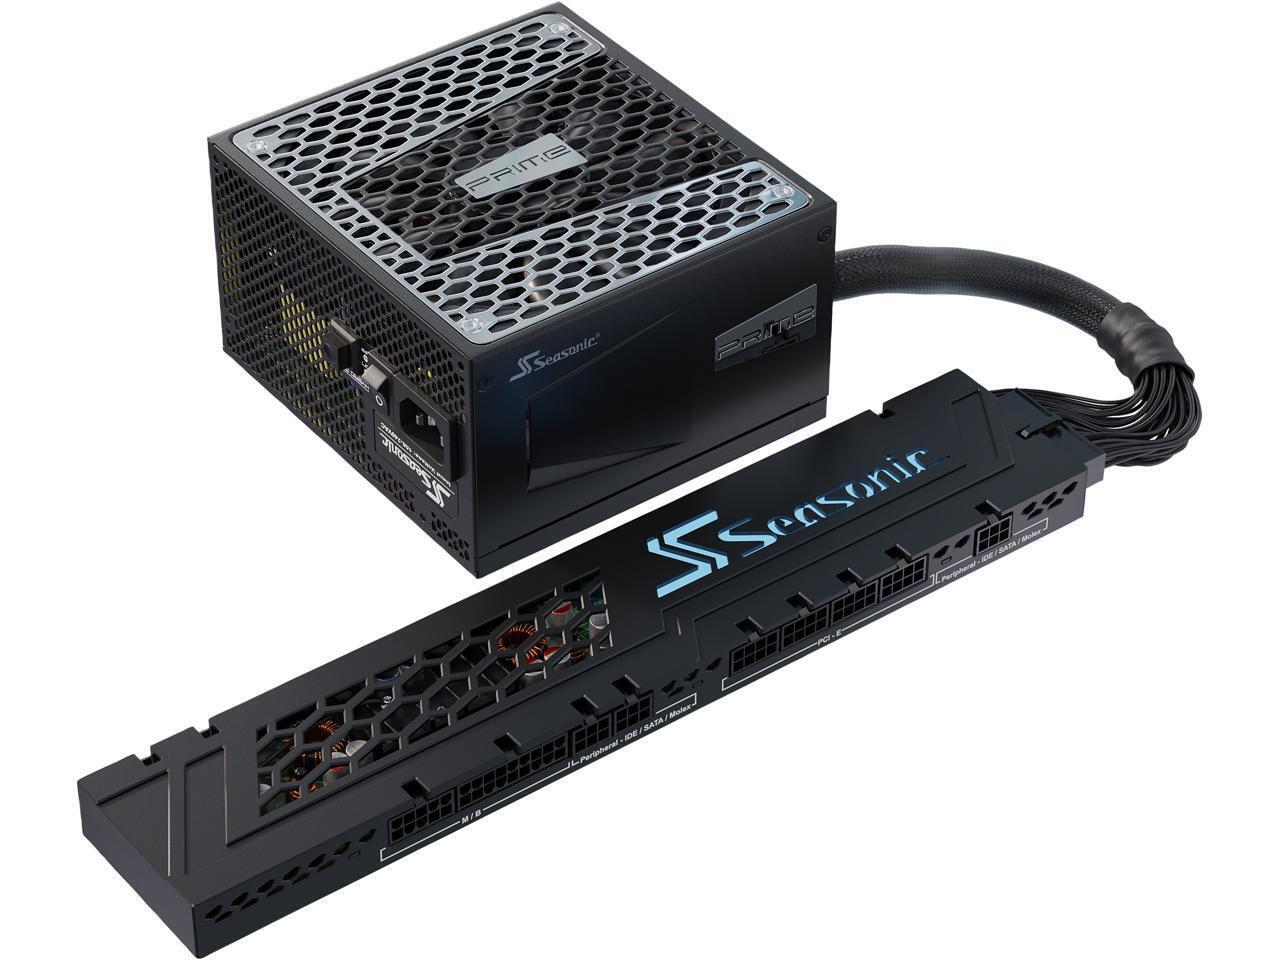 750W Seasonic Connect Comprise Prime 80+ Gold Fully Modular Power Supply w/ Backplane (SSR-750FA) $69.74 + Free Shipping